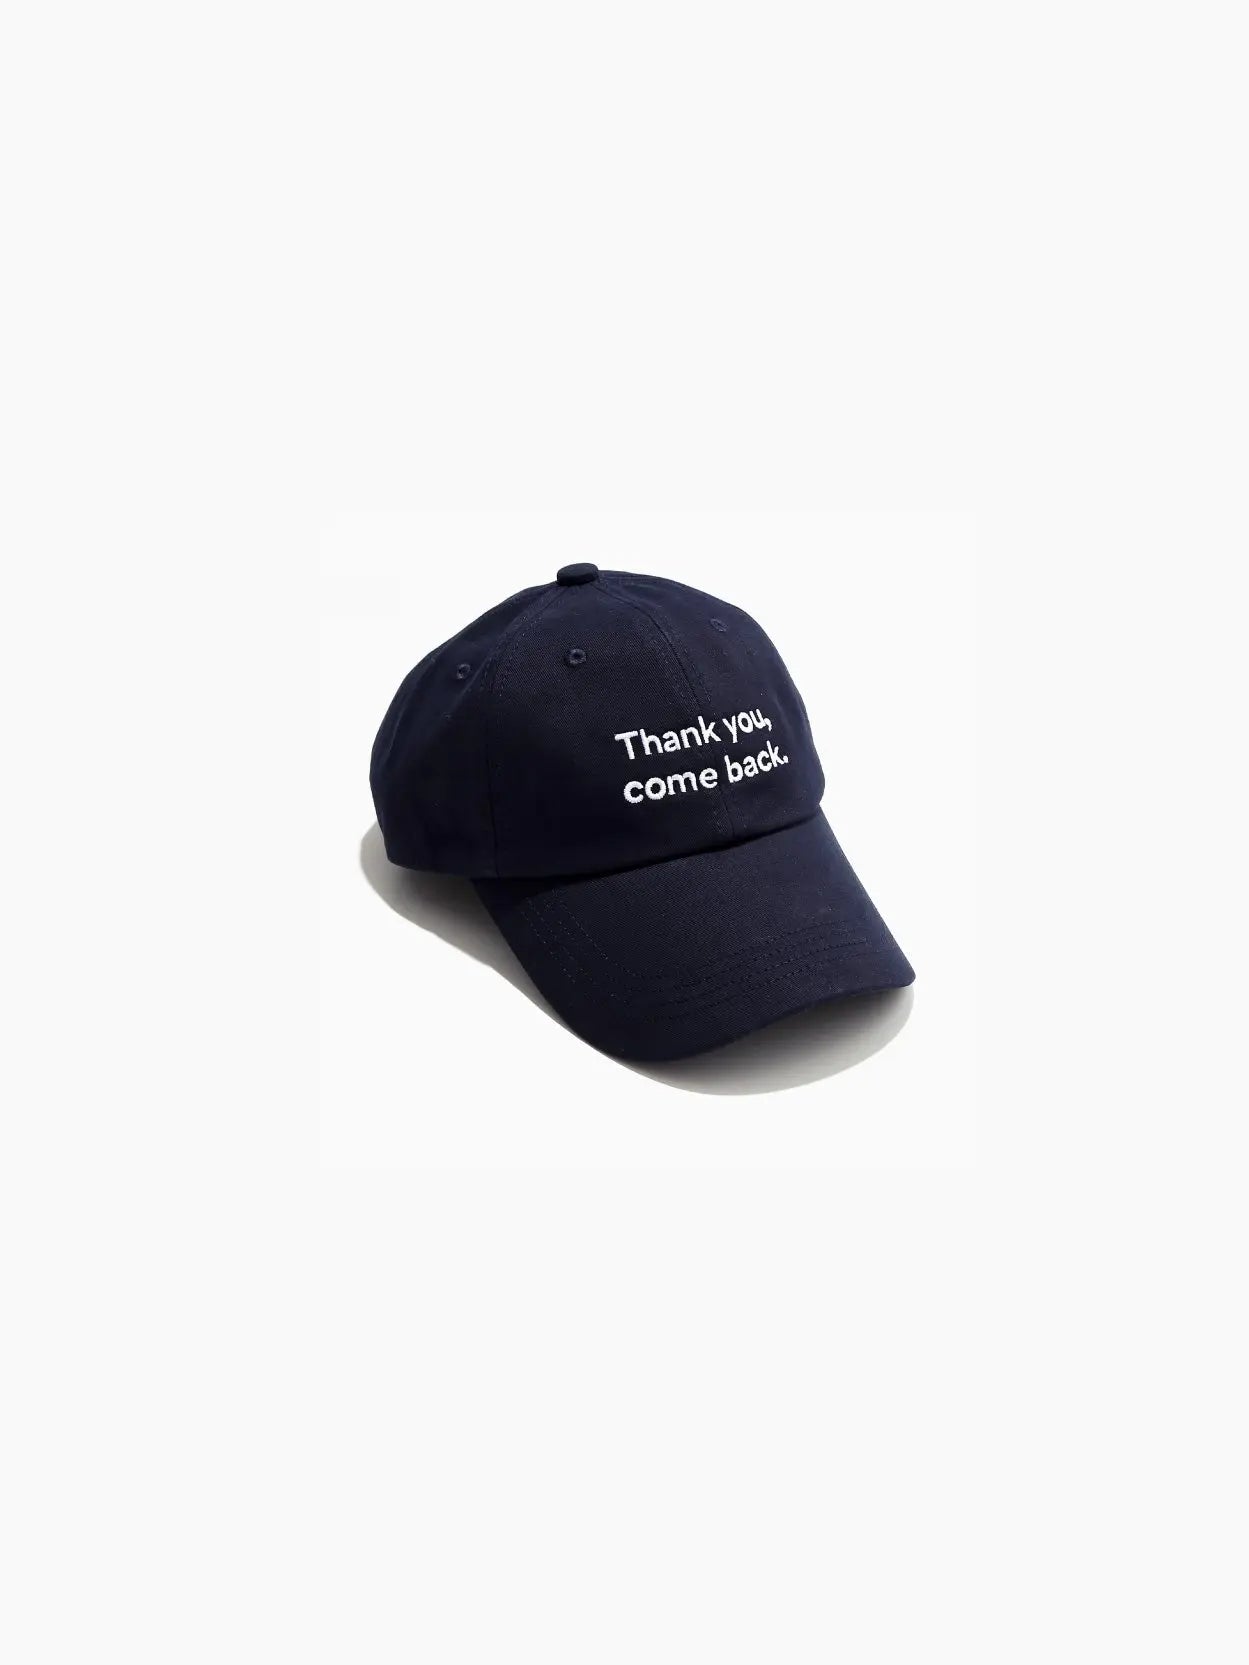 A Thank You, Come Back Cap Navy from Bassal Store with the text "Thank you, come back." embroidered in white on the front. The cap has a curved brim and six panels with stitching details. Perfect for your next visit to a bustling store in Barcelona.